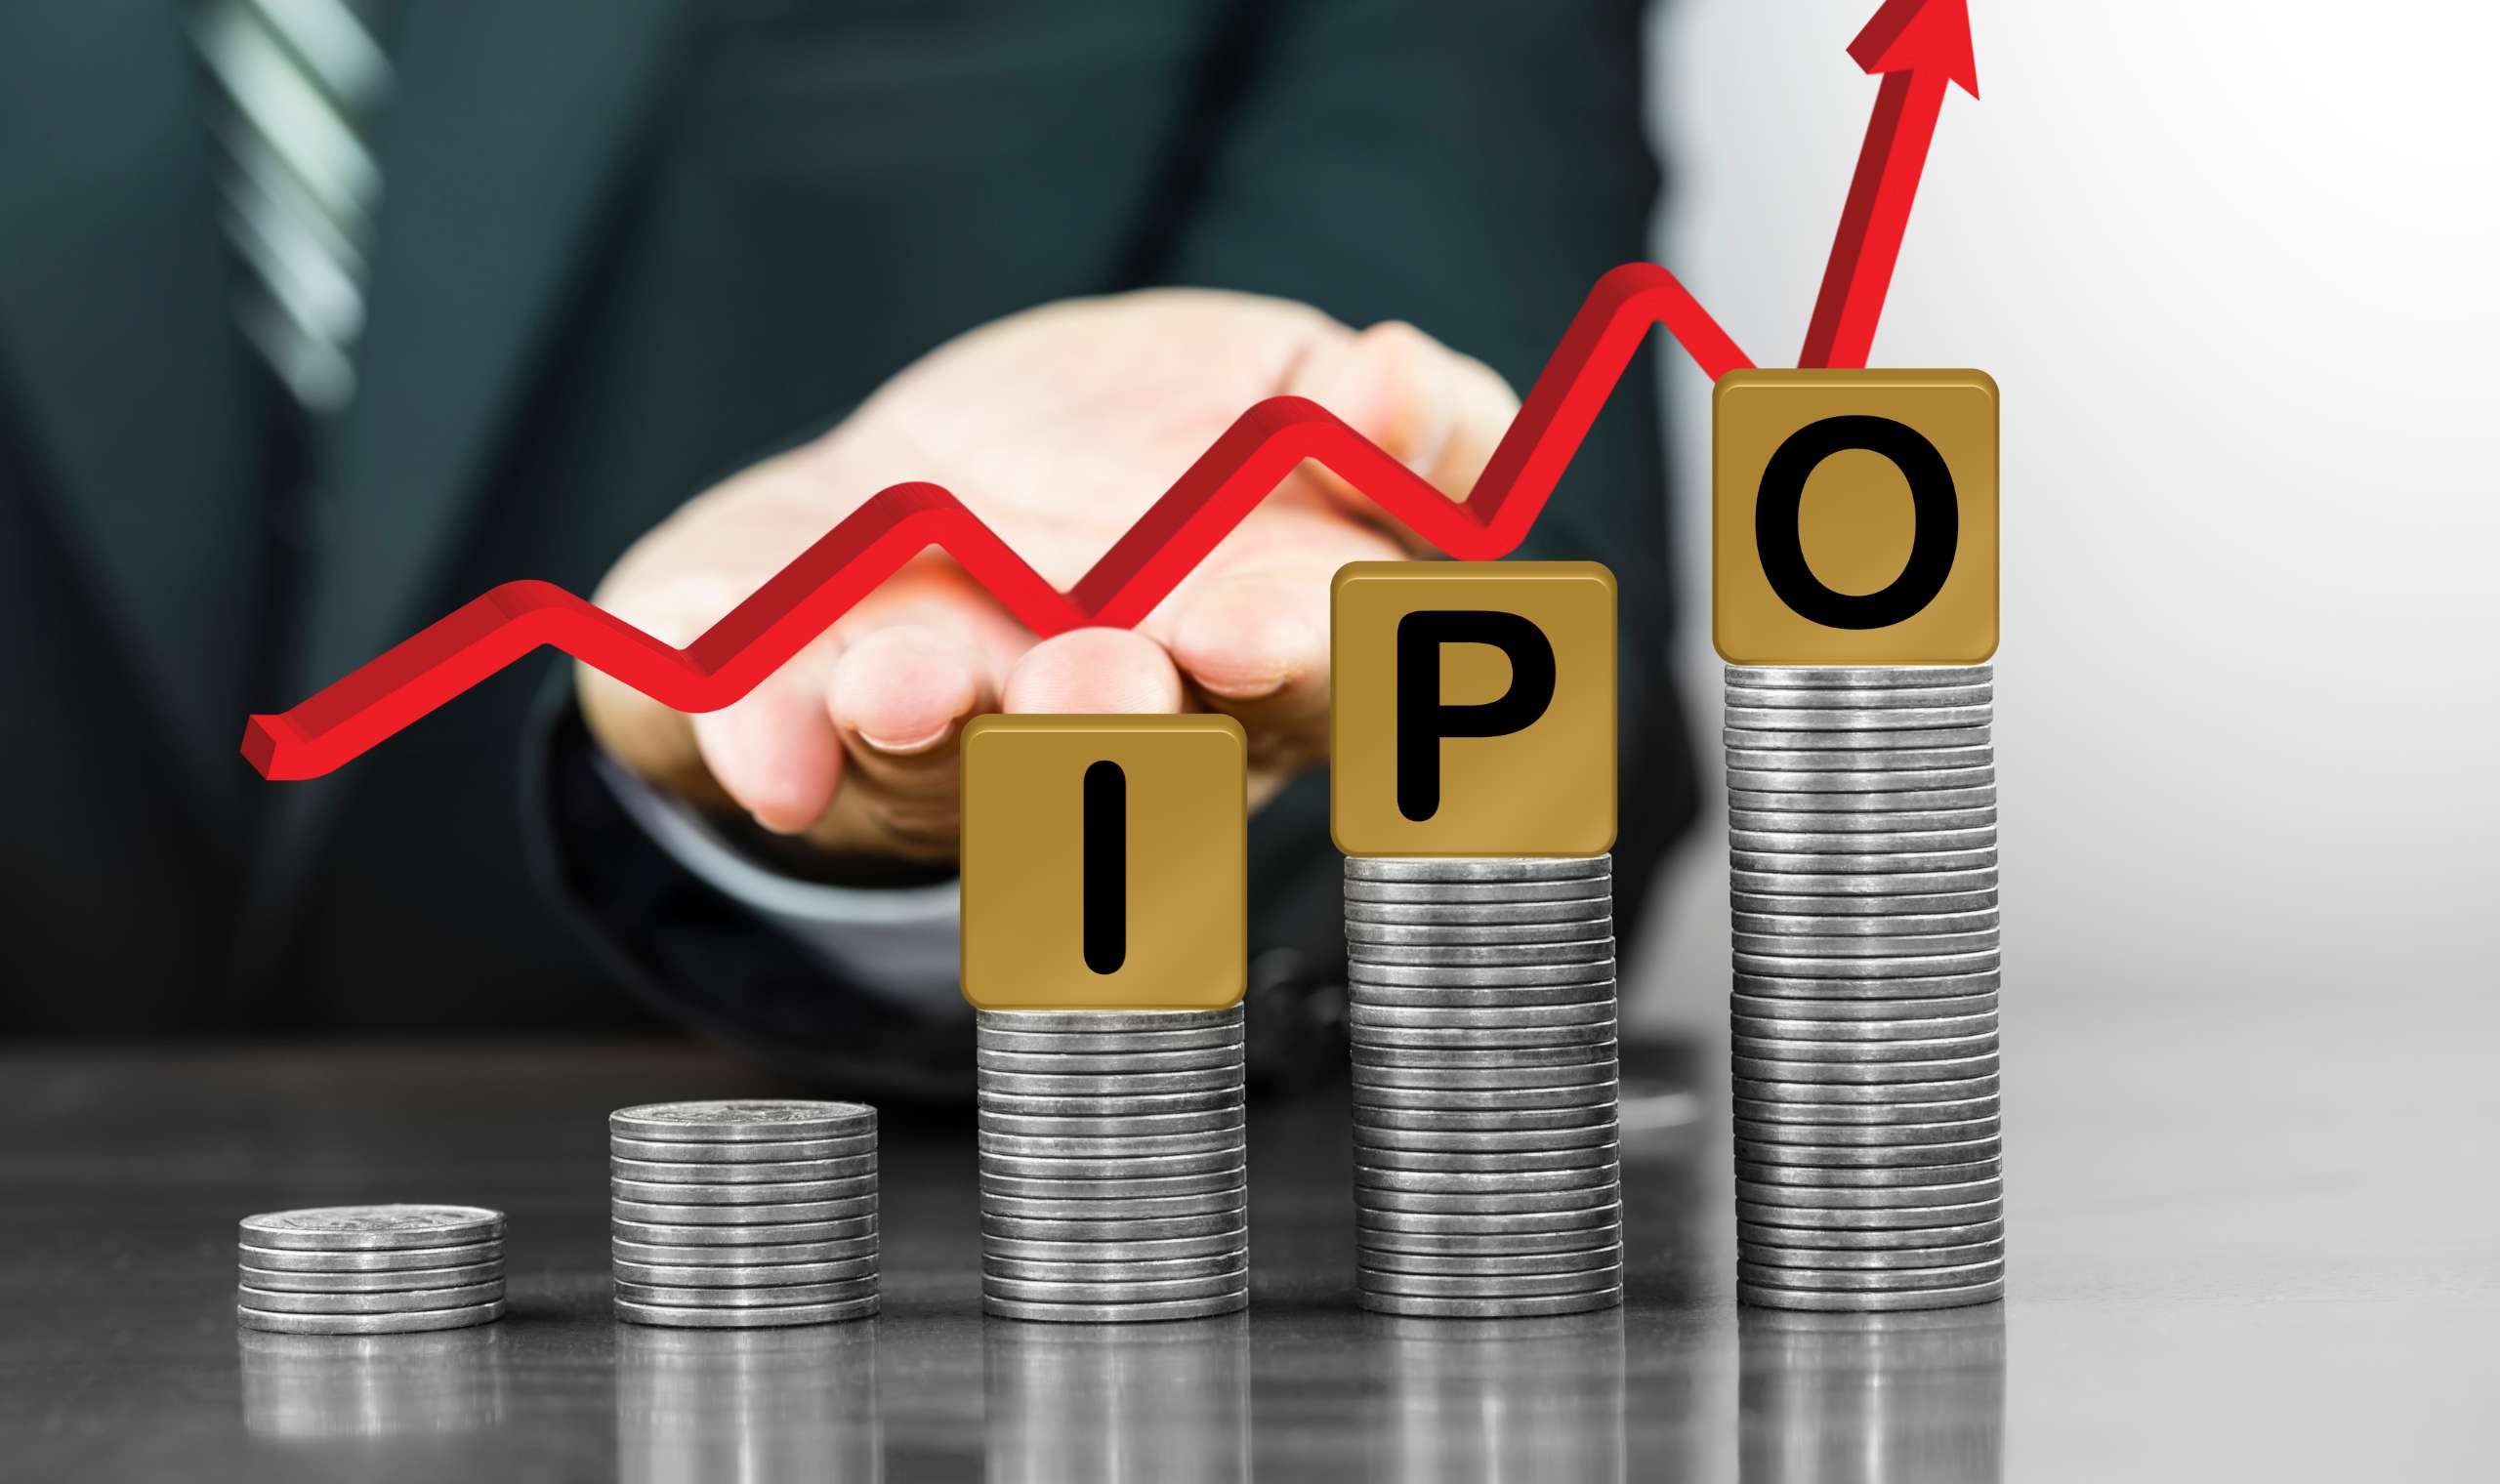 IPO: The Process of a Private Company Going Public